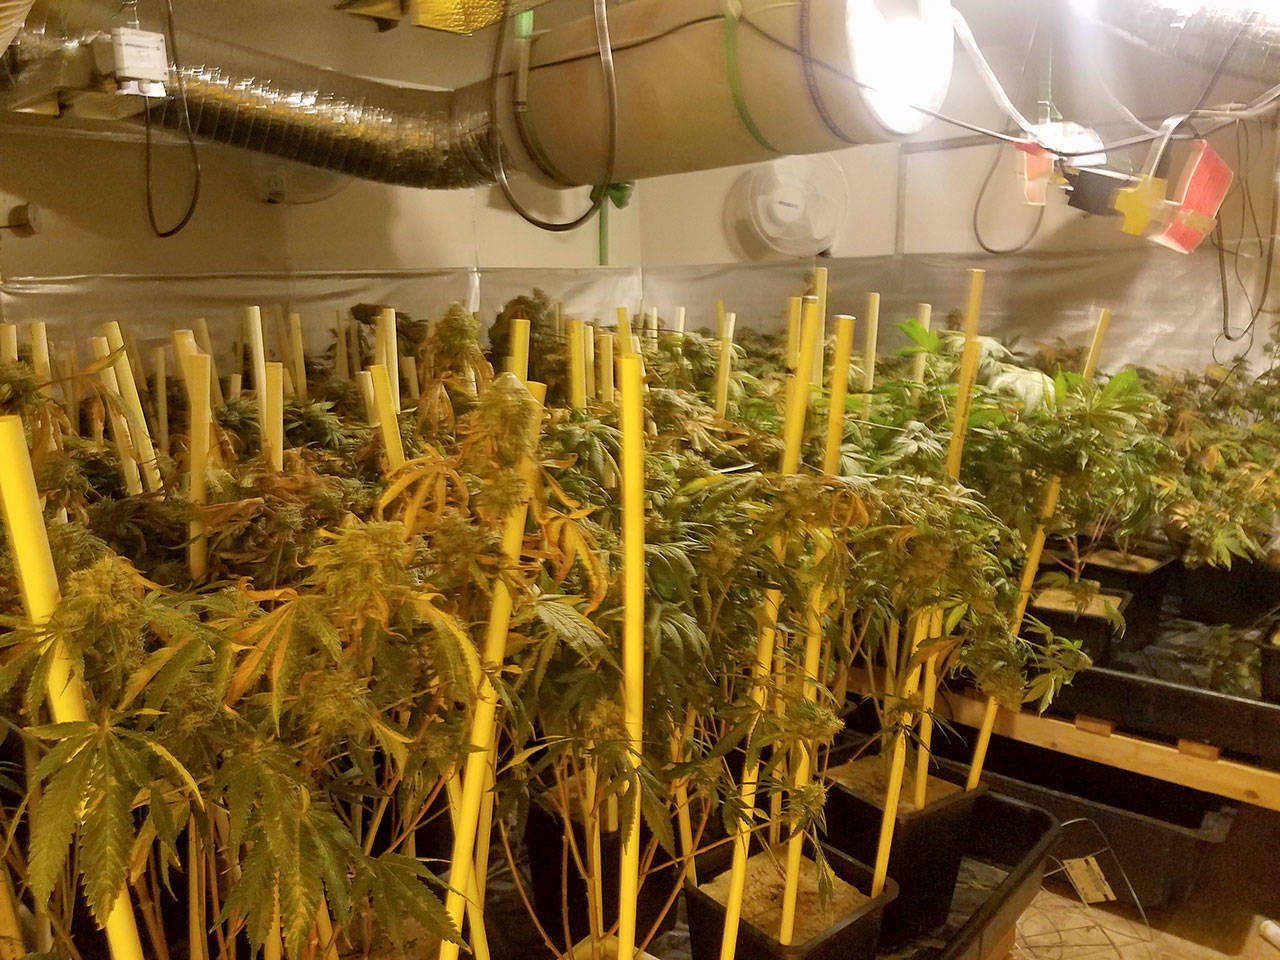 Another view of a pot grow operation at an address on Saddle Club Road Southeast in South Kitsap. (Kitsap County Sheriff’s Office photo)